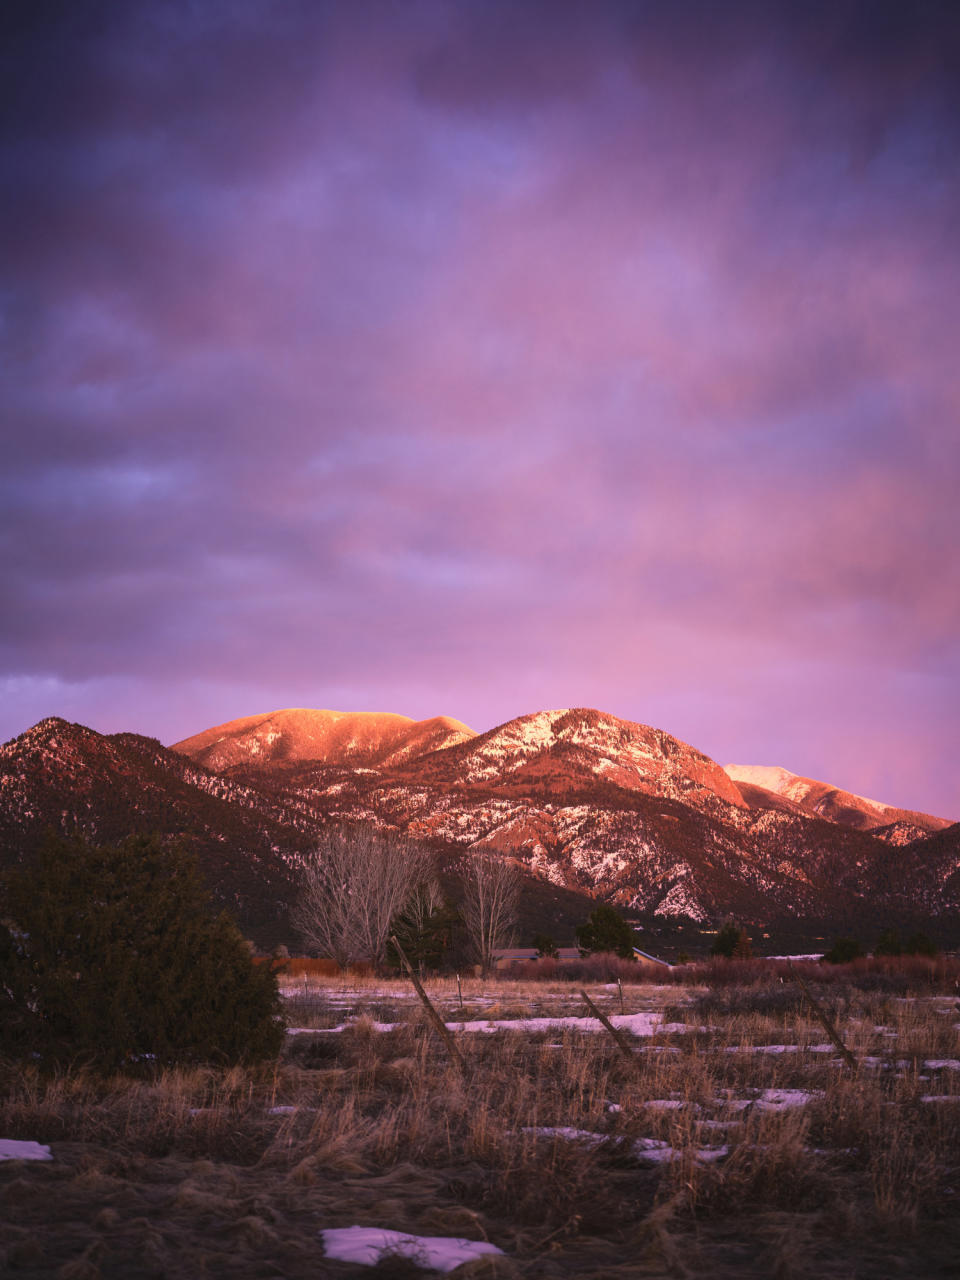 A pink sunset in Taos, New Mexico.